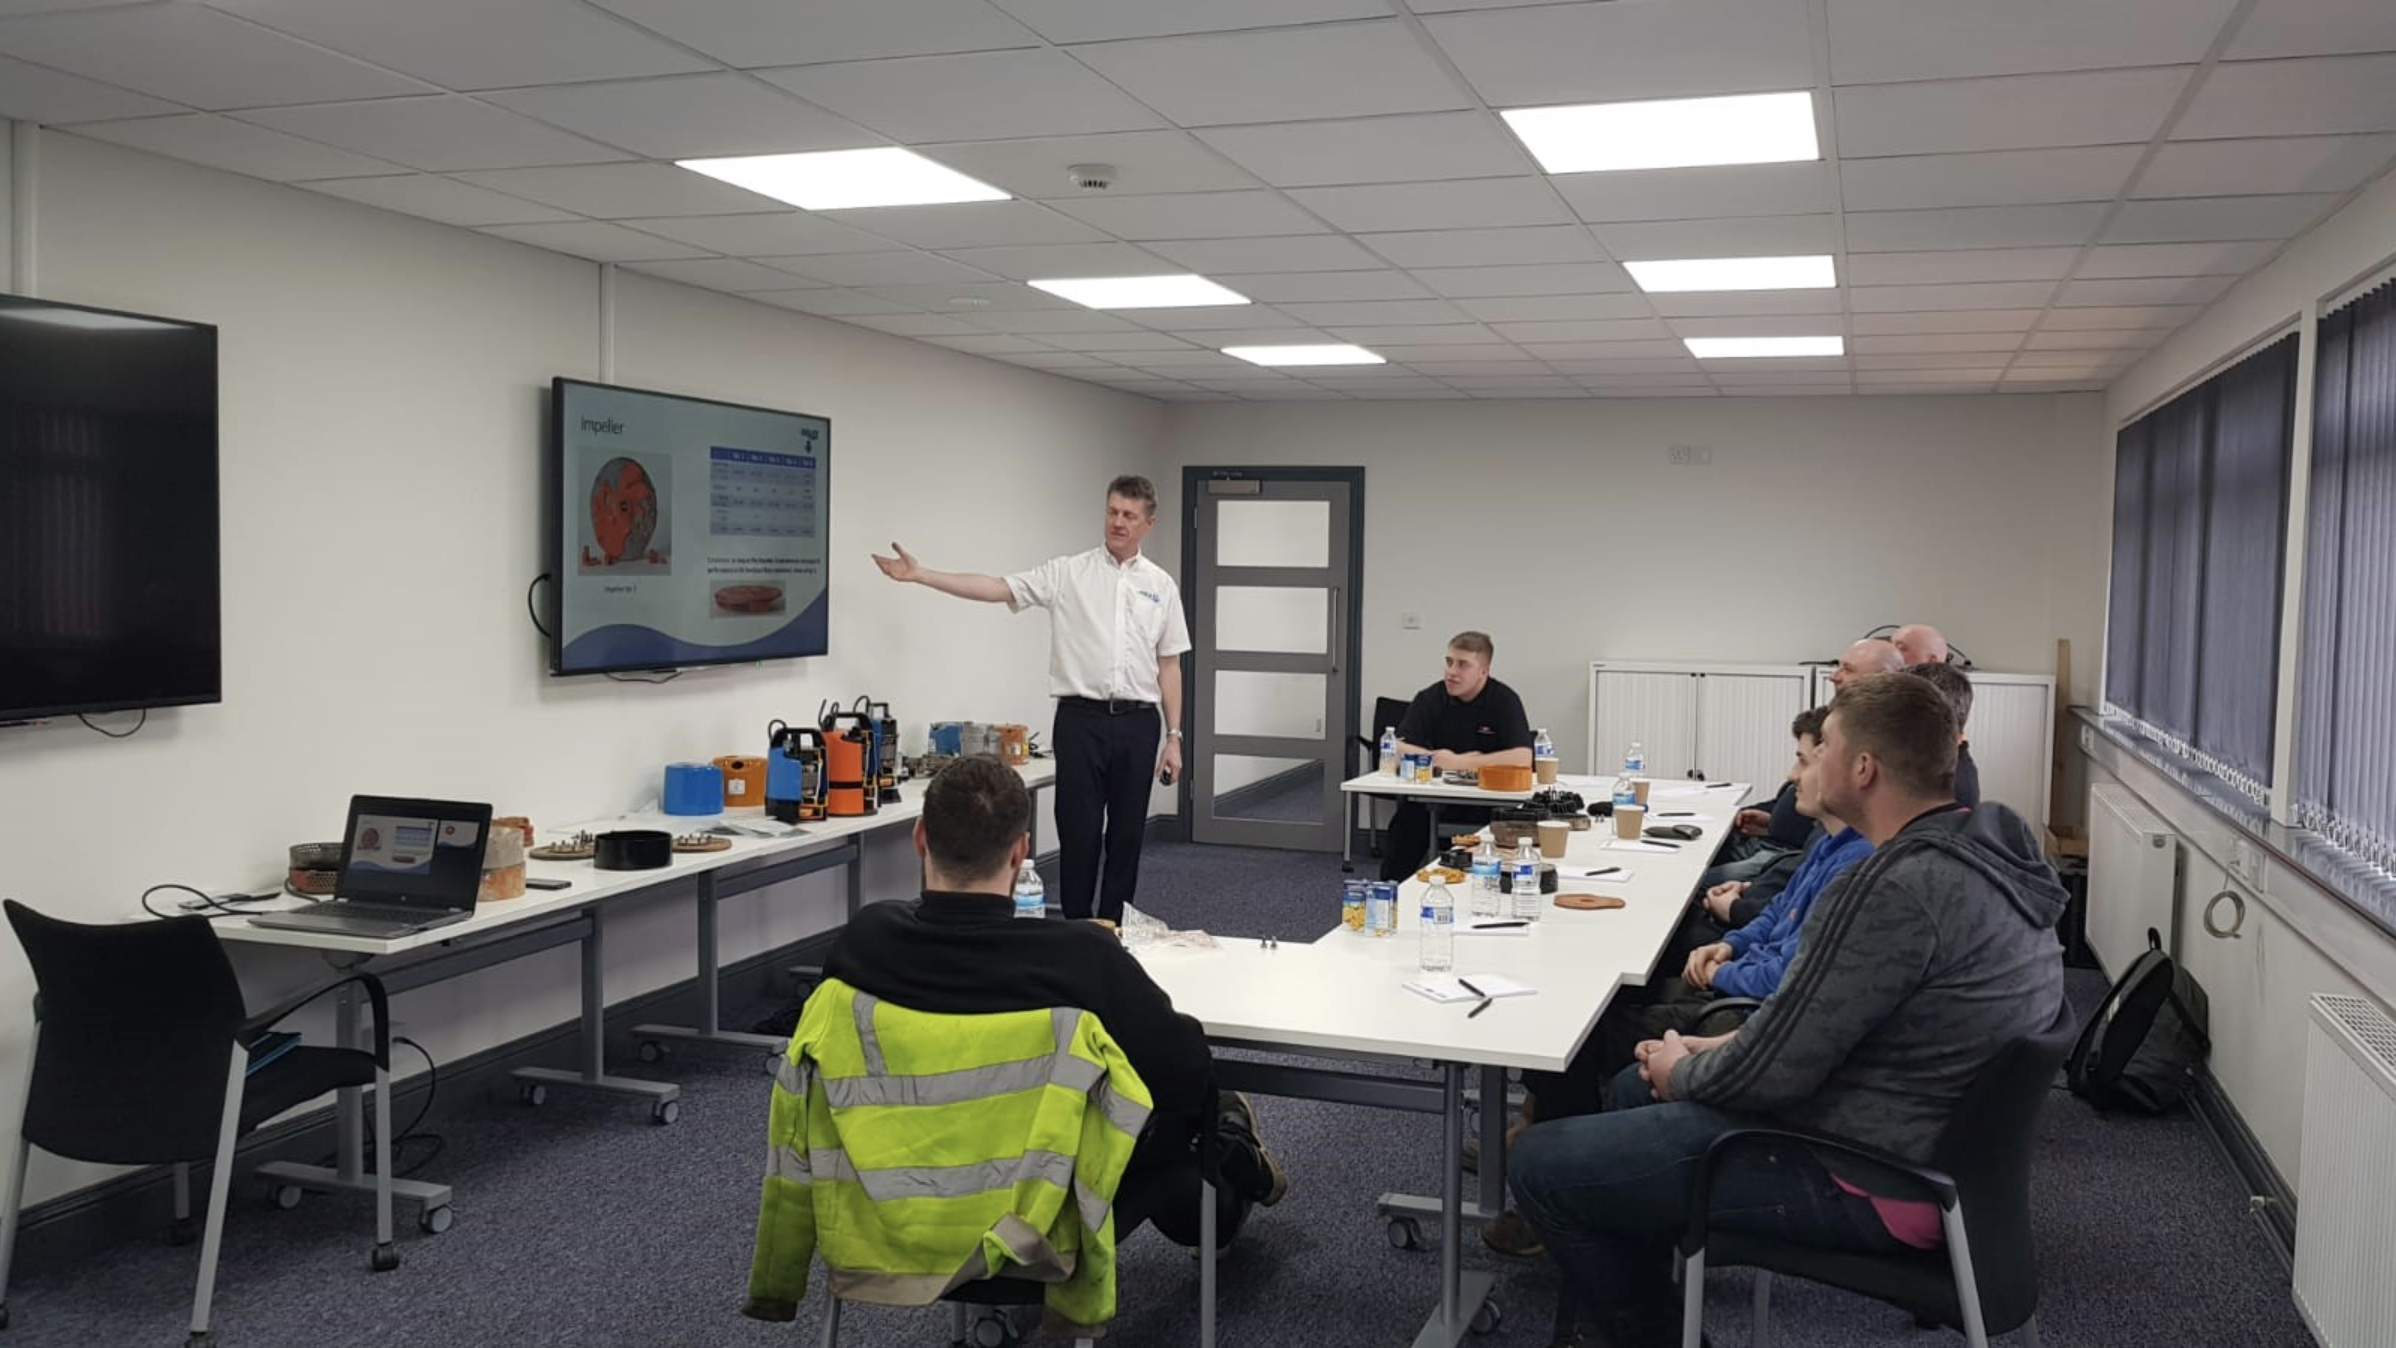 Matthew Hill with participants on the Tsurumi pump training course in Glasgow.